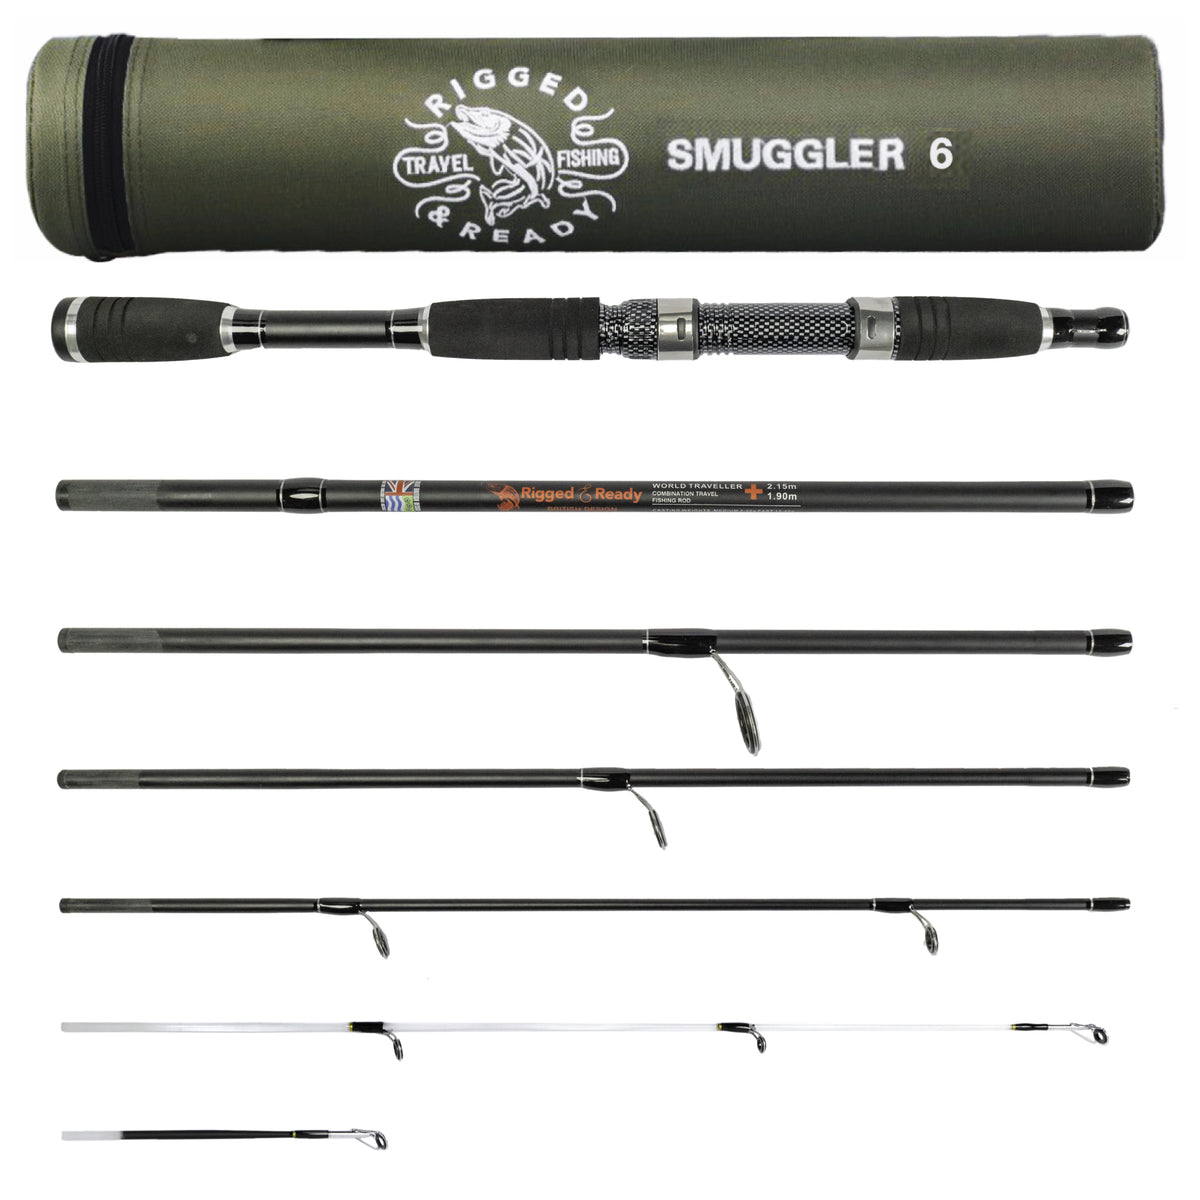 Smuggler 6 215+190cm Compact Travel Fishing Rod + 2 tips – Rigged and Ready